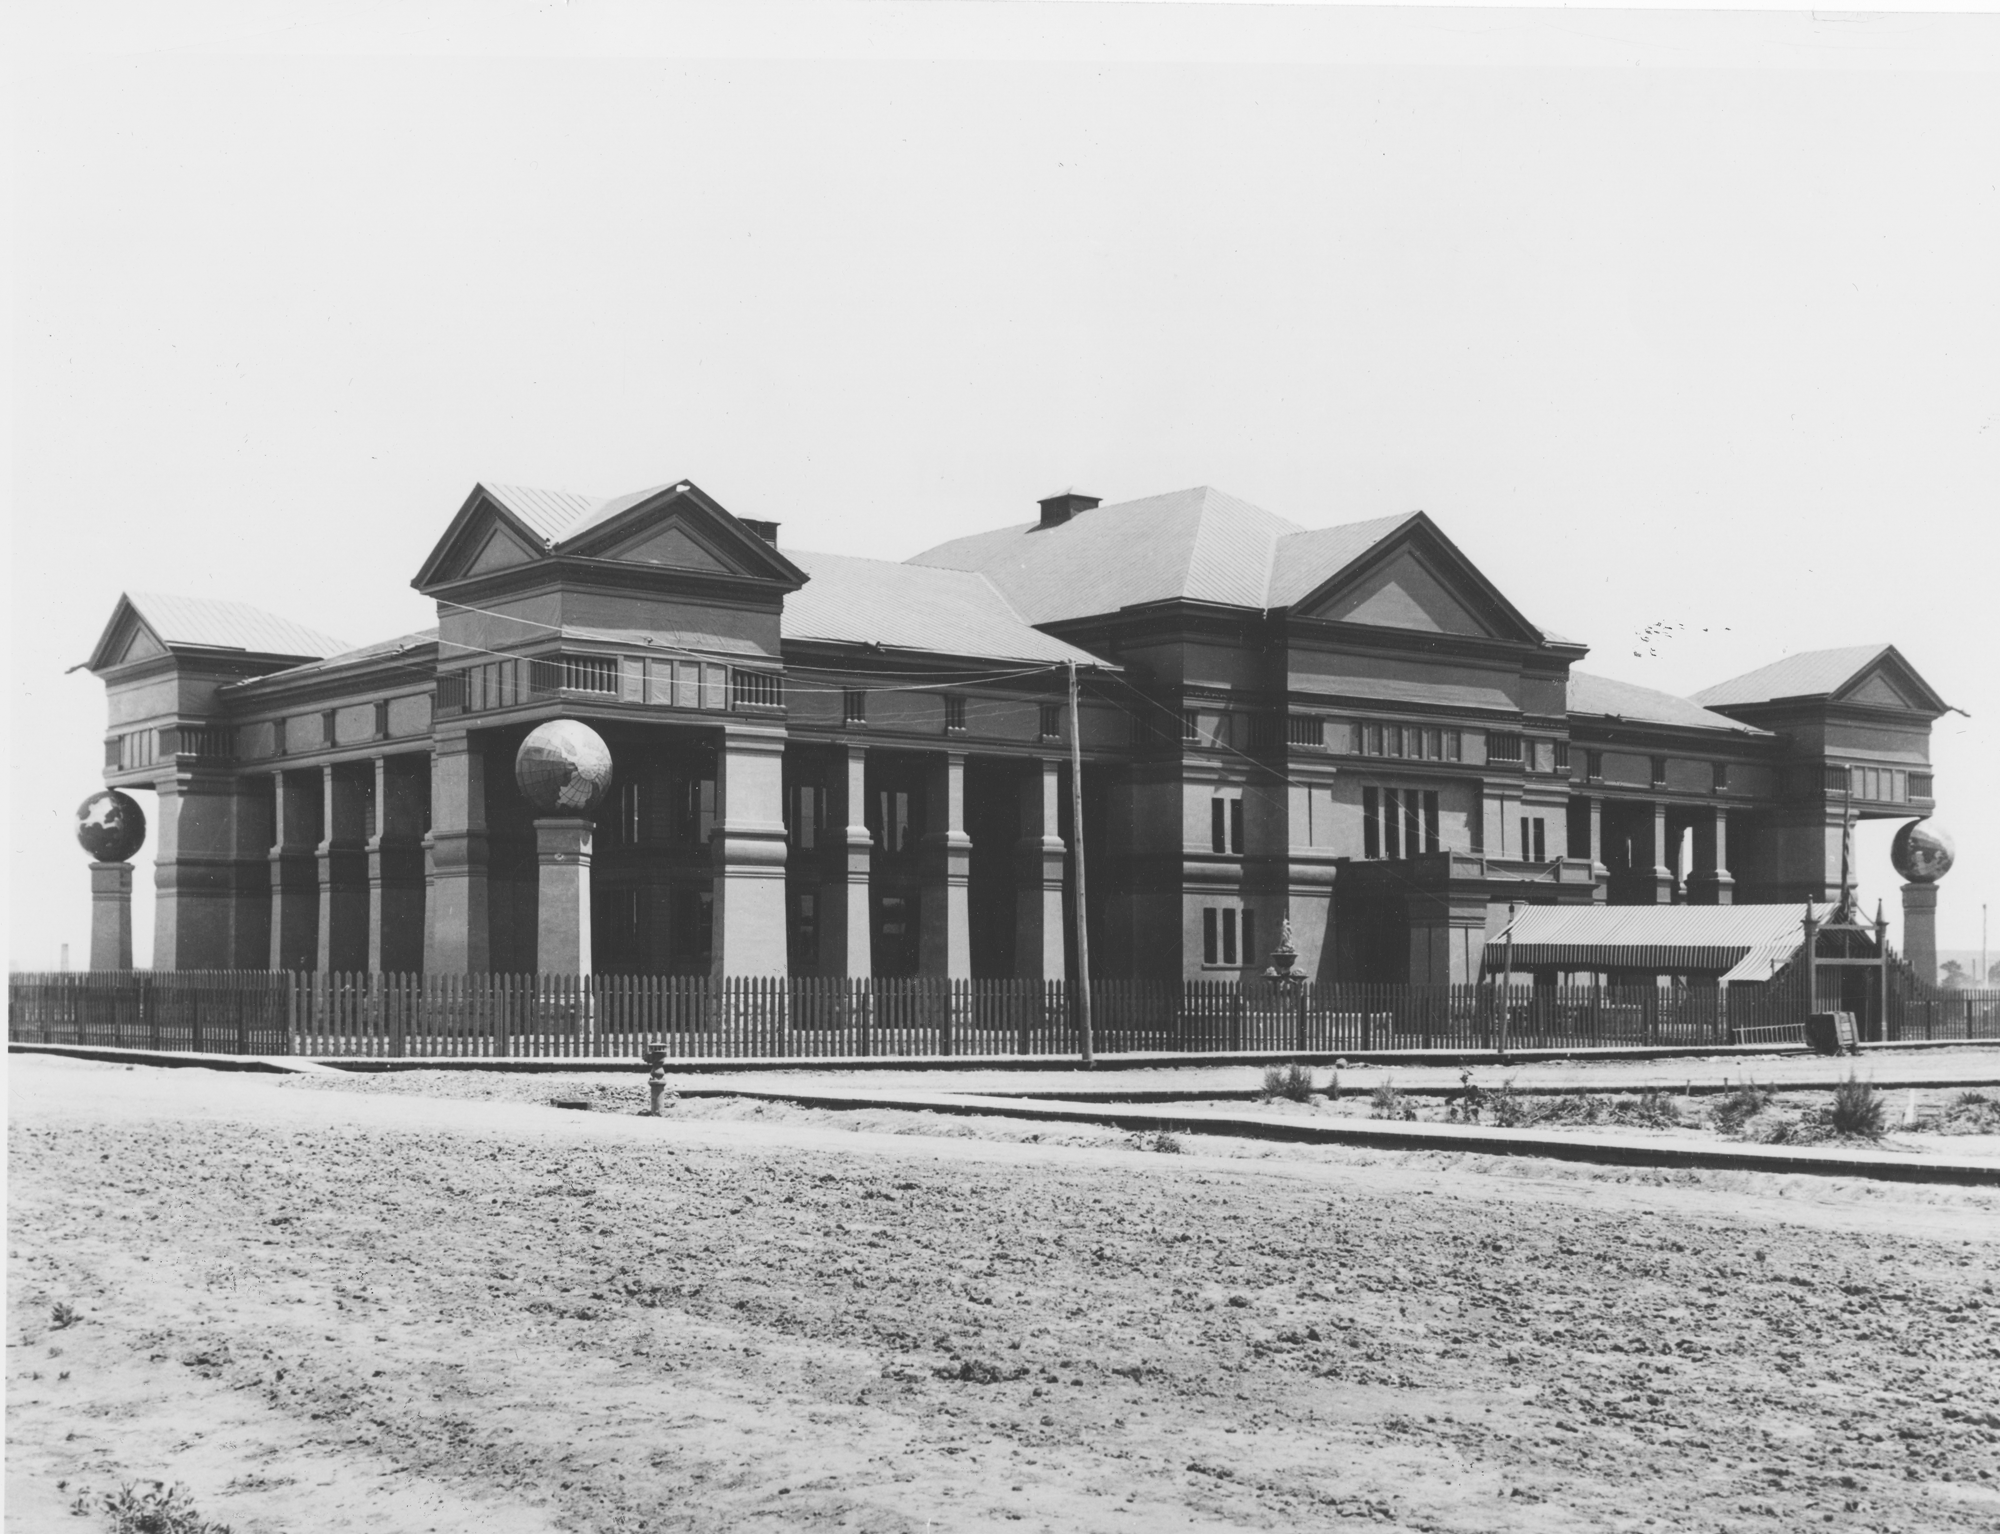 Early photo of the Mineral Palace